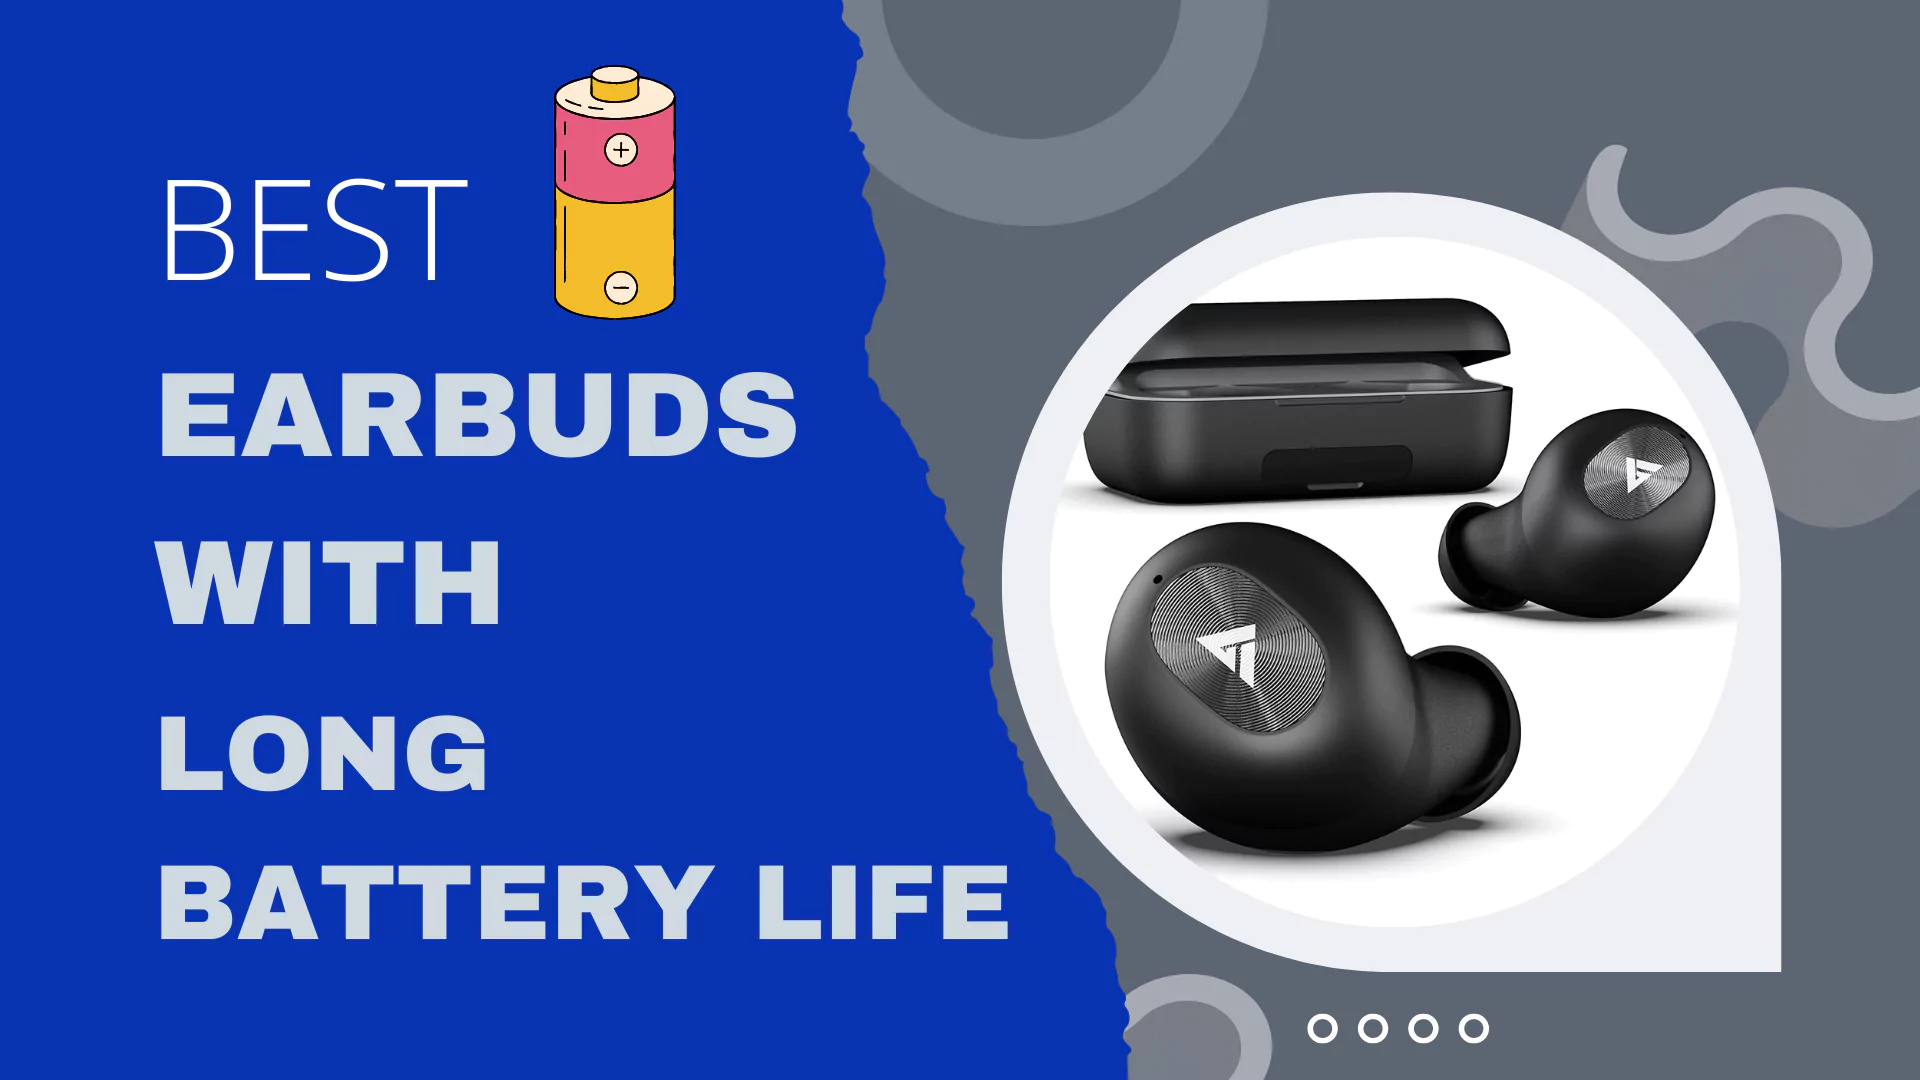 8 Best Earbuds with Long Battery Life (Feb 2023) - Take me technically